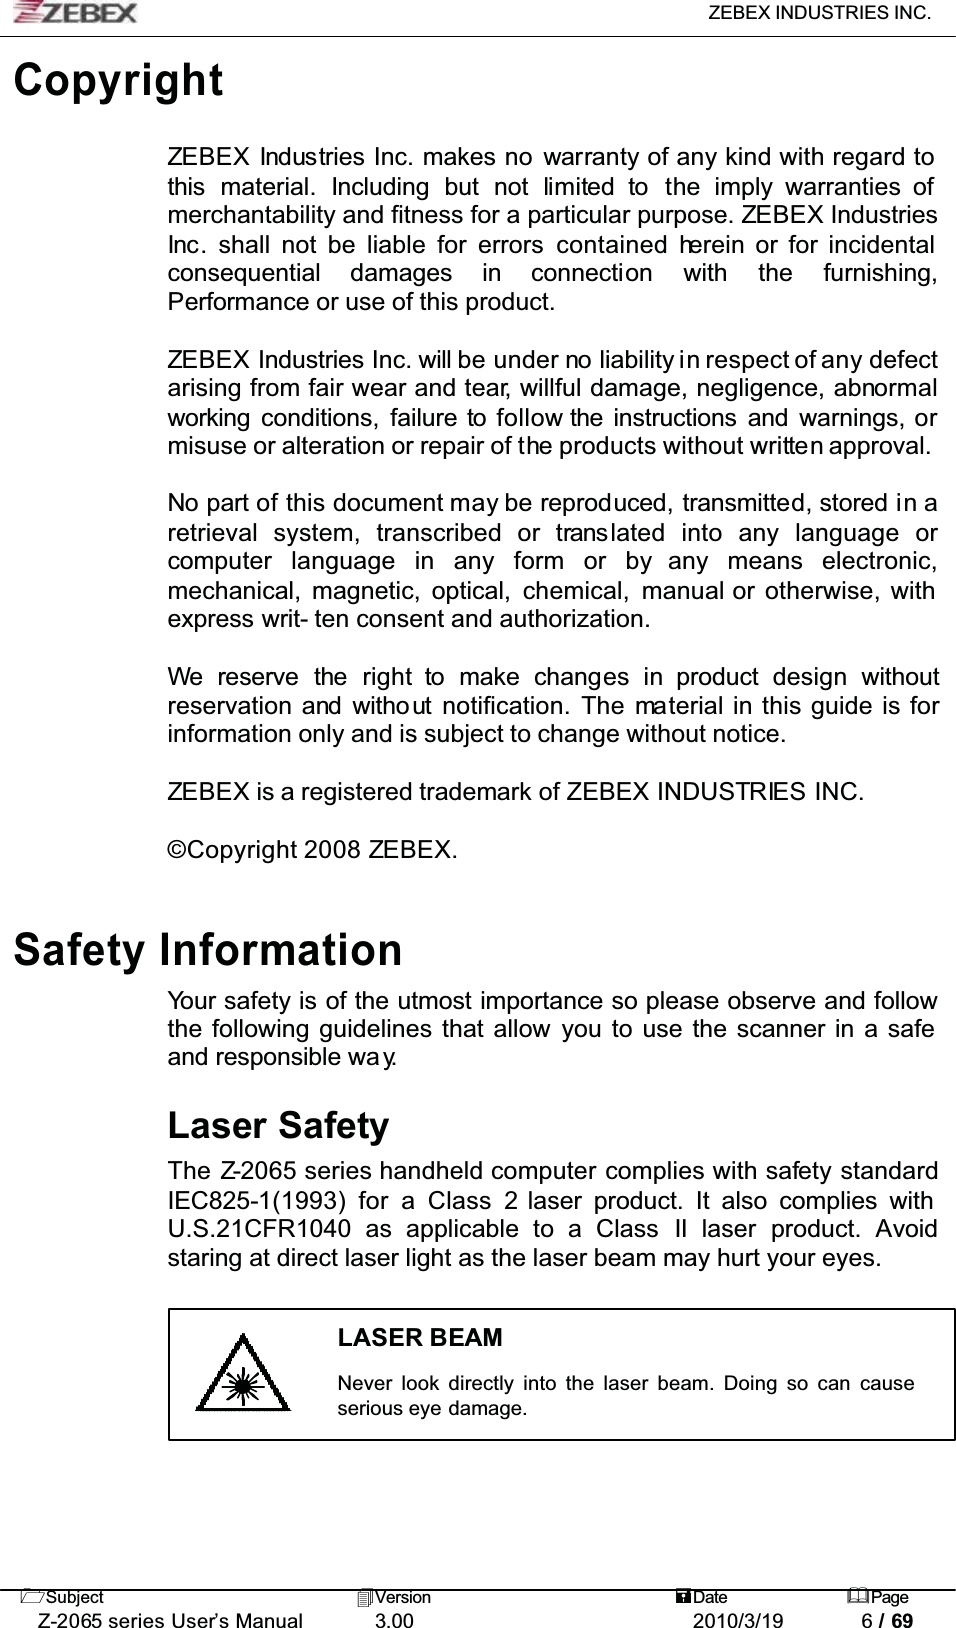 ZEBEX INDUSTRIES INC. Subject Version Date PageZ-2065 series User’s Manual 3.00 2010/3/19 6 / 69CopyrightZEBEX Industries Inc. makes no warranty of any kind with regard tothis material. Including but not limited to the imply warranties of merchantability and fitness for a particular purpose. ZEBEX IndustriesInc. shall not be liable for errors contained herein or for incidental consequential damages in connection with the furnishing,Performance or use of this product.ZEBEX Industries Inc. will be under no liability in respect of any defectarising from fair wear and tear, willful damage, negligence, abnormalworking conditions, failure to follow the instructions and warnings, ormisuse or alteration or repair of the products without written approval.No part of this document may be reproduced, transmitted, stored in aretrieval system, transcribed or translated into any language orcomputer language in any form or by any means electronic,mechanical, magnetic, optical, chemical, manual or otherwise, with express writ- ten consent and authorization.We reserve the right to make changes in product design withoutreservation and witho ut  notification. The material in this guide is for information only and is subject to change without notice.ZEBEX is a registered trademark of ZEBEX INDUSTRIES INC.© Copyright 2008 ZEBEX.Safety InformationYour safety is of the utmost importance so please observe and follow the following guidelines that allow you to use the scanner in a safeand responsible wa y.Laser SafetyThe Z-2065 series handheld computer complies with safety standard IEC825-1(1993) for a Class 2 laser product. It also complies with U.S.21CFR1040 as applicable to a Class II laser product. Avoidstaring at direct laser light as the laser beam may hurt your eyes.LASER BEAMNever look directly into the laser beam. Doing so can cause serious eye damage.